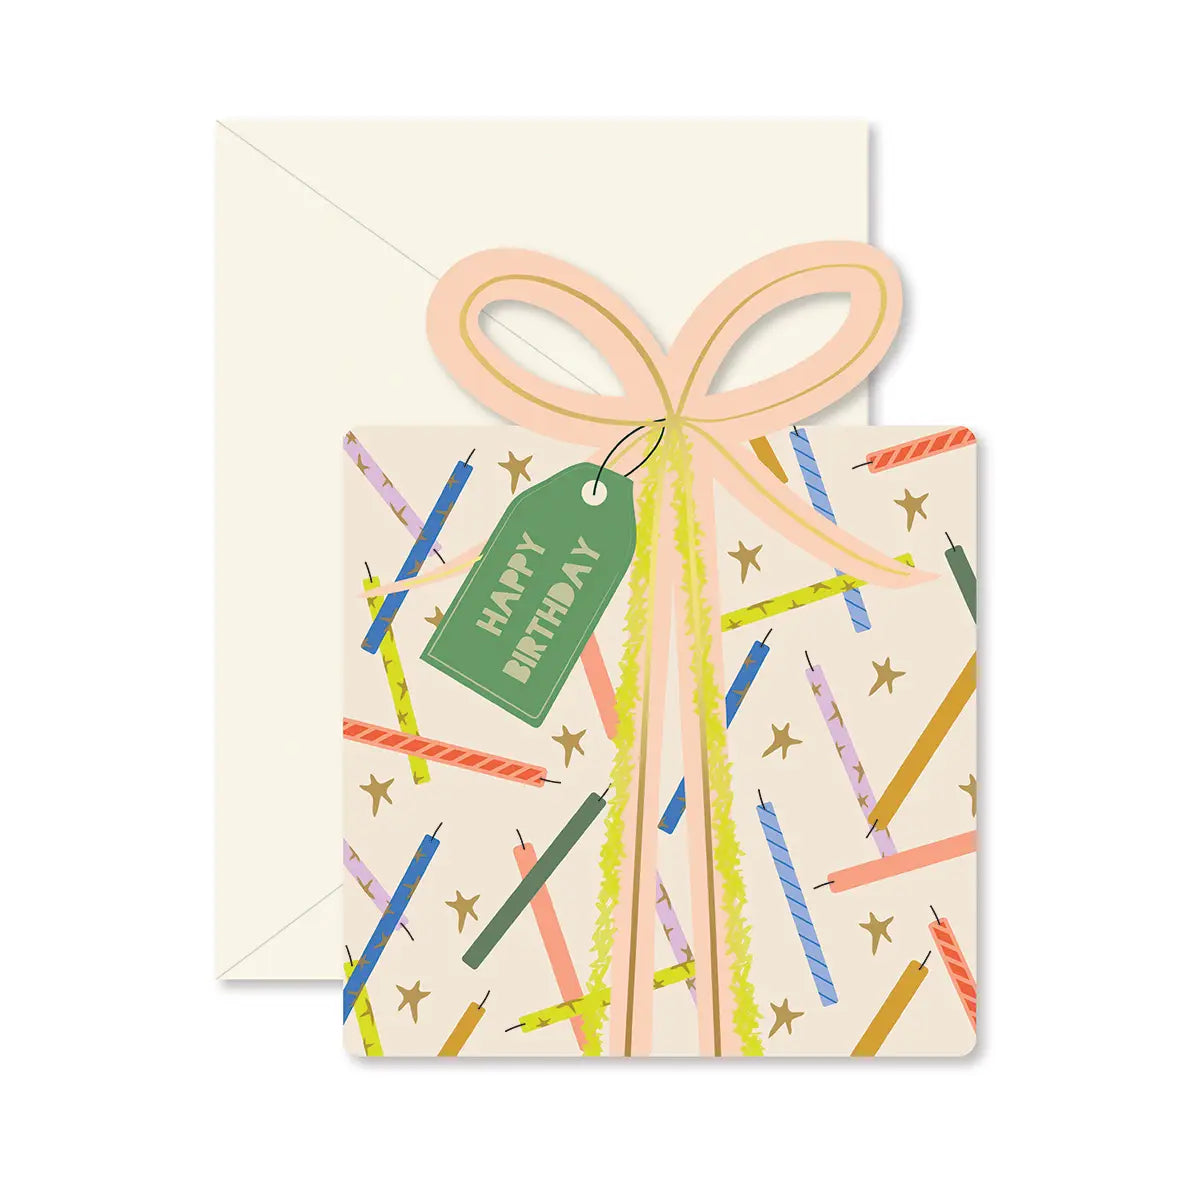 happy birthday card in the shape of a present or gift made in the USA by a woman-owned business